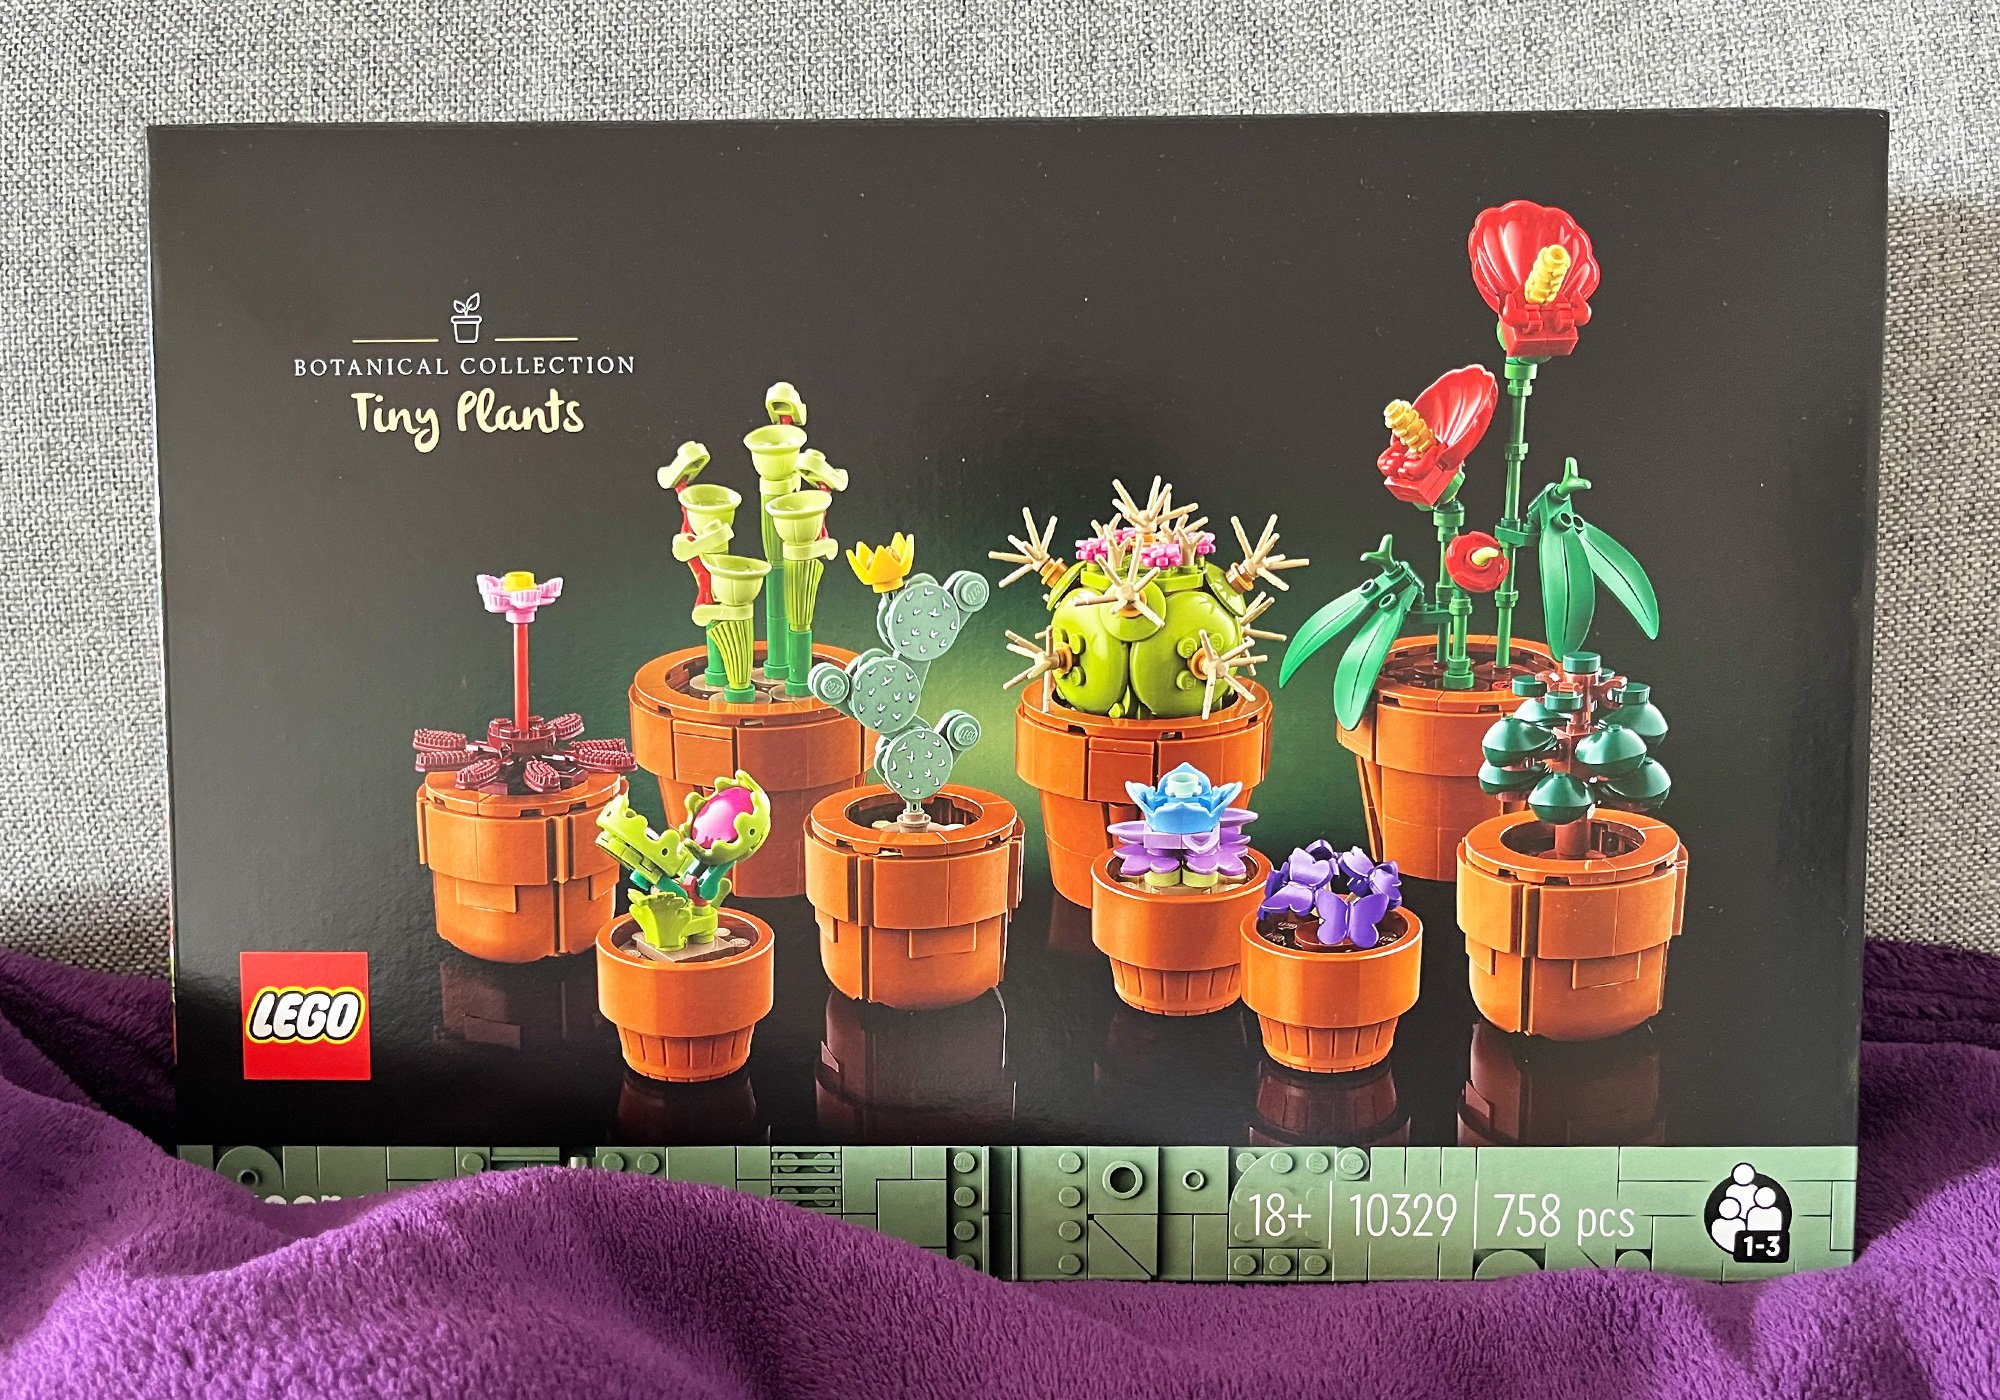 Tiny Plants with Huge MOC Potential - BrickNerd - All things LEGO and the  LEGO fan community